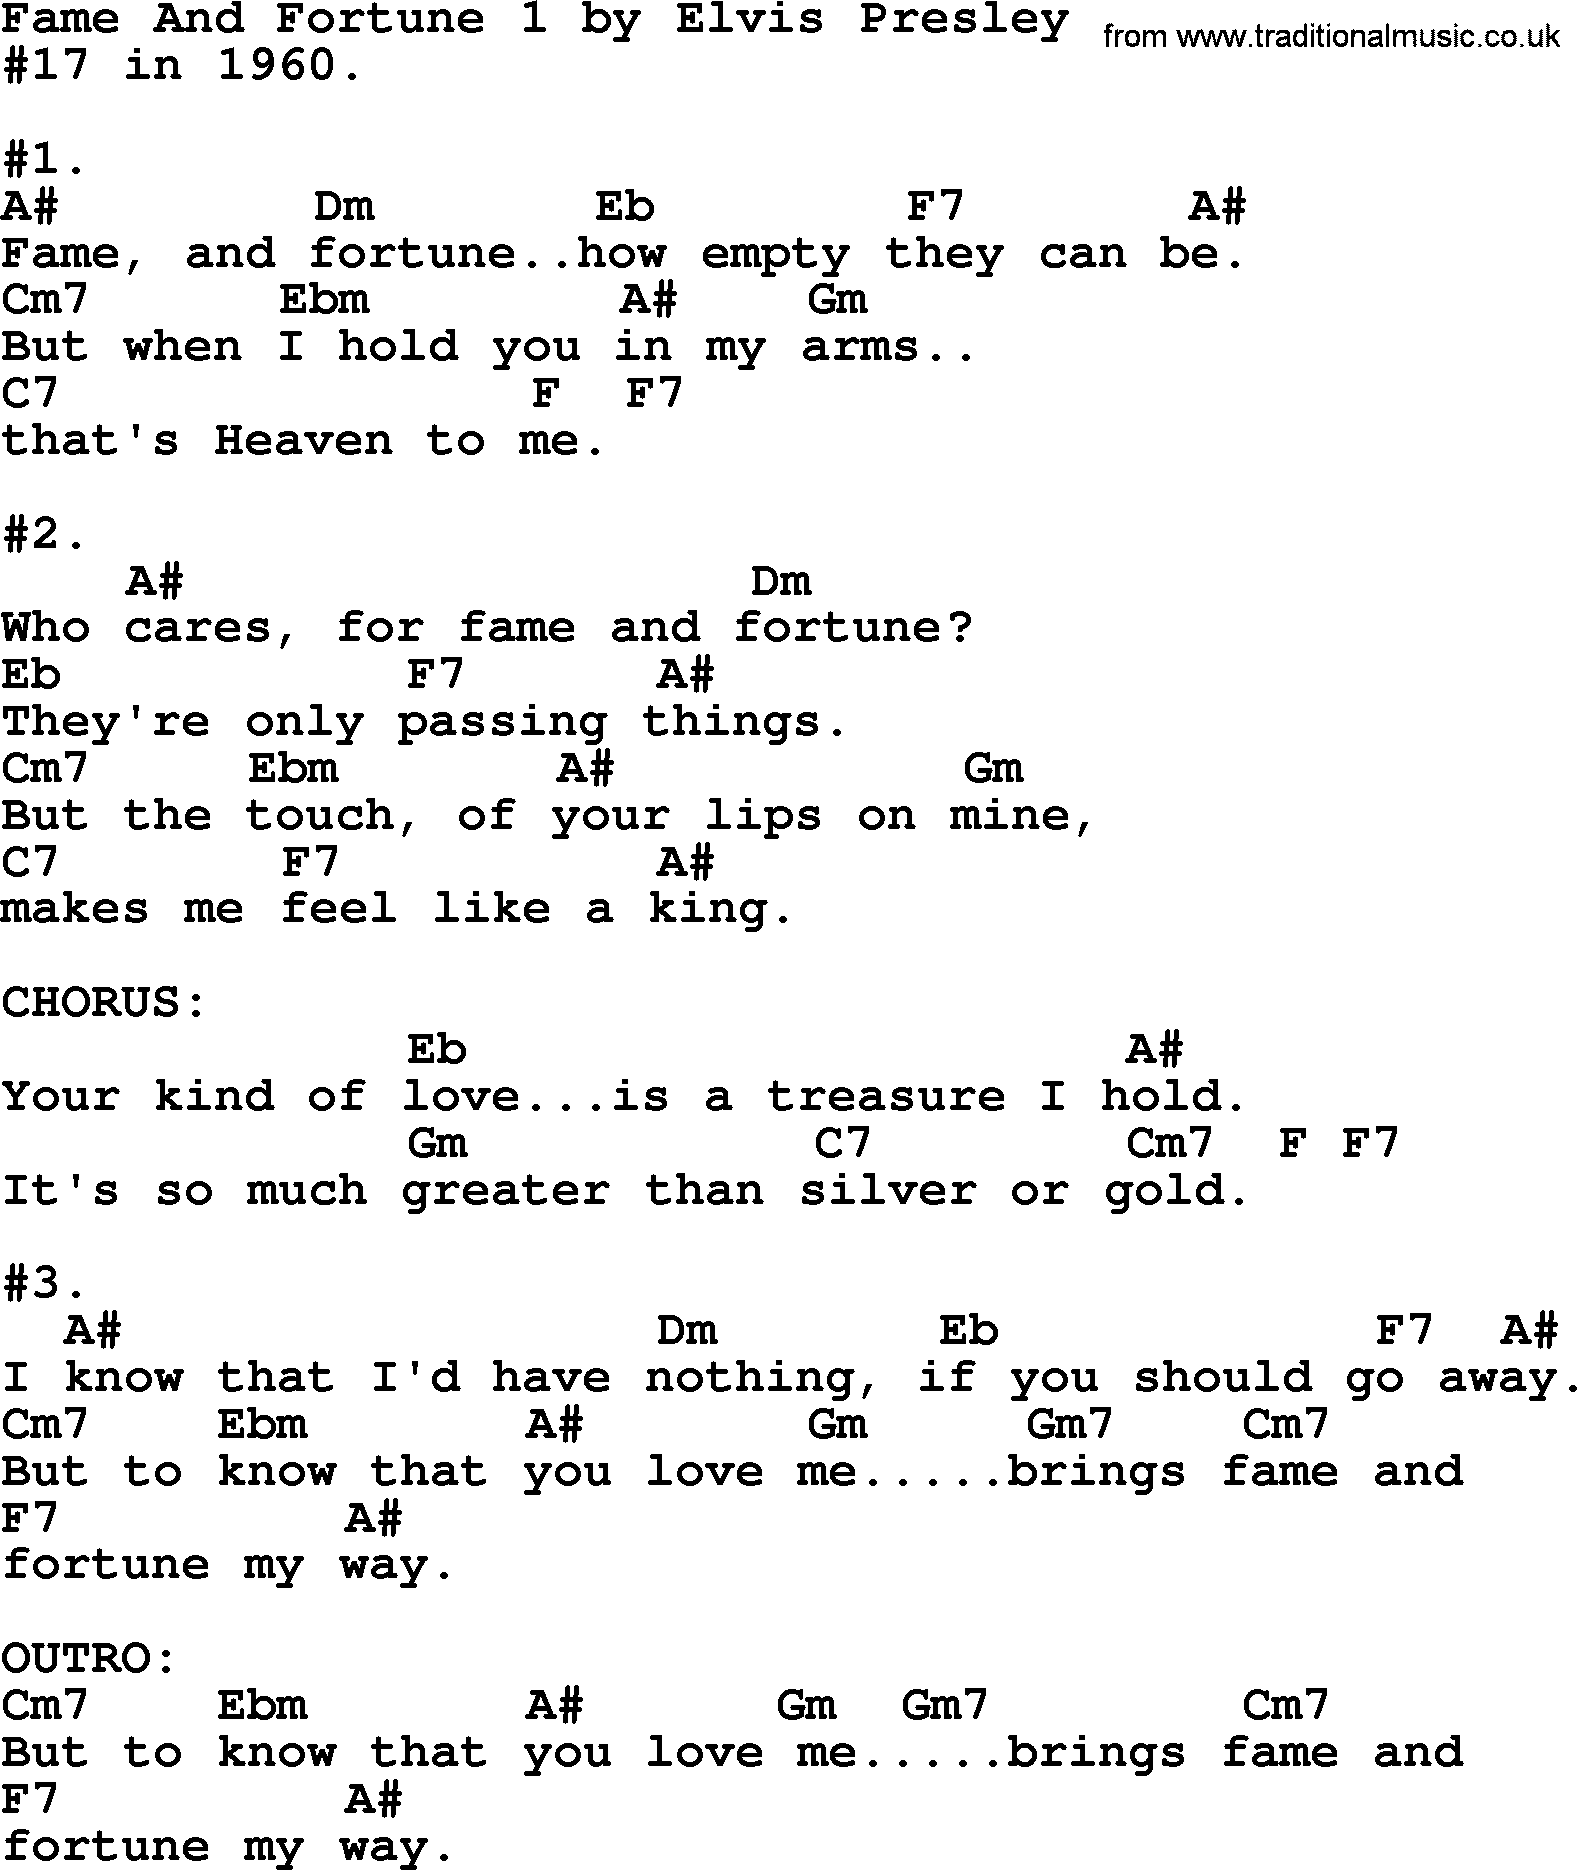 Elvis Presley song: Fame And Fortune 1, lyrics and chords